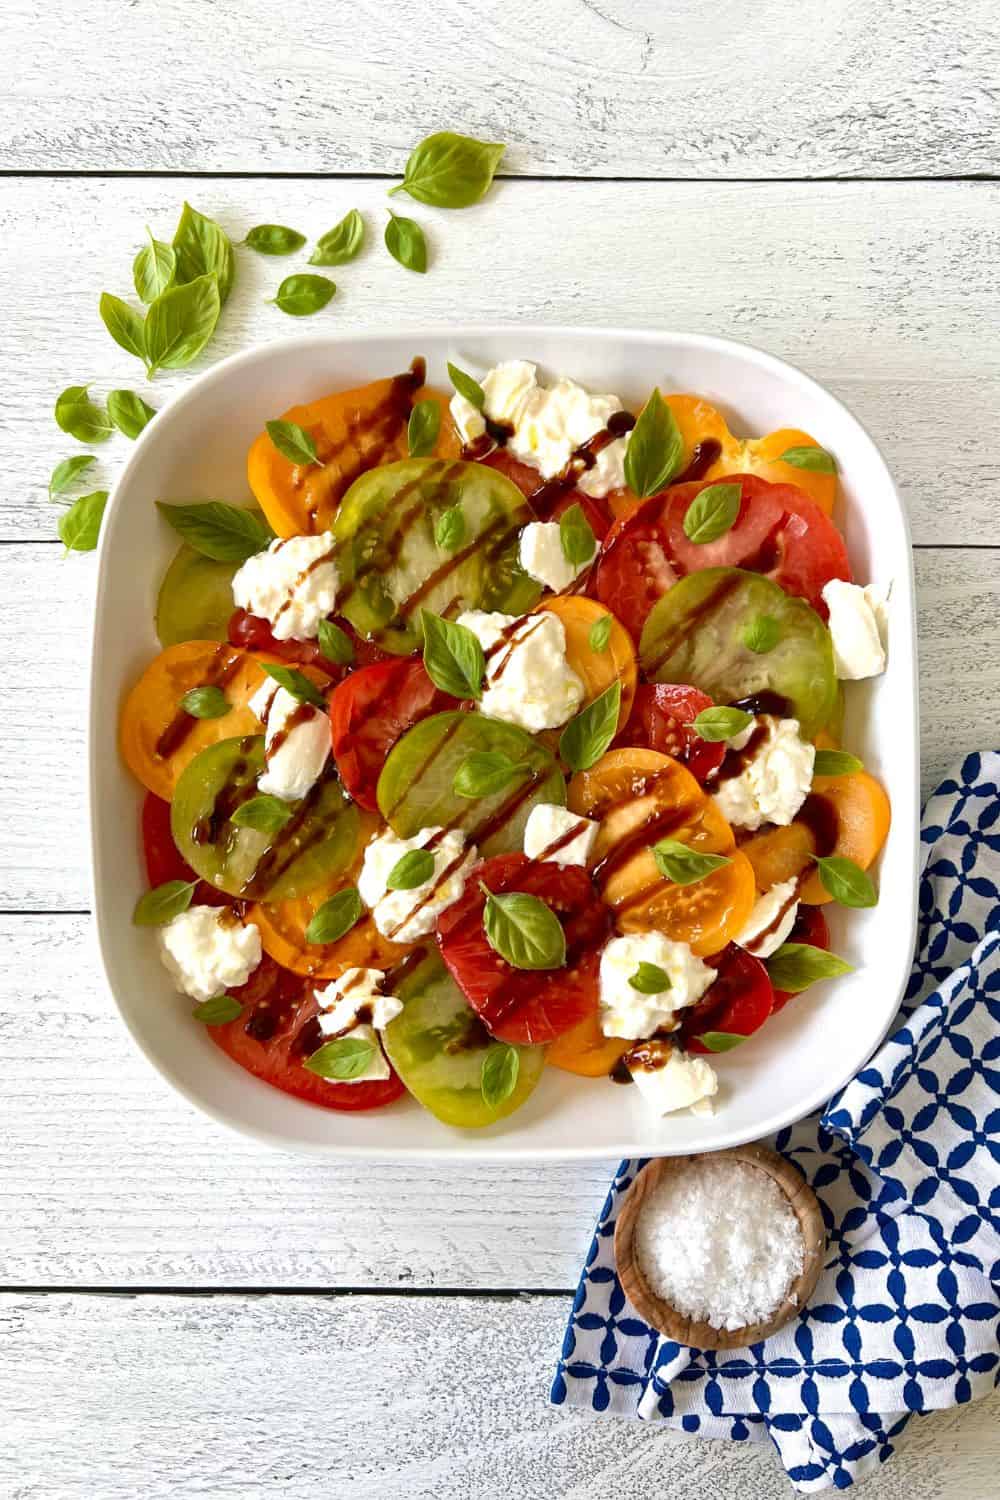 A tomato salad with burrata cheese and basil leaves in a white platter.